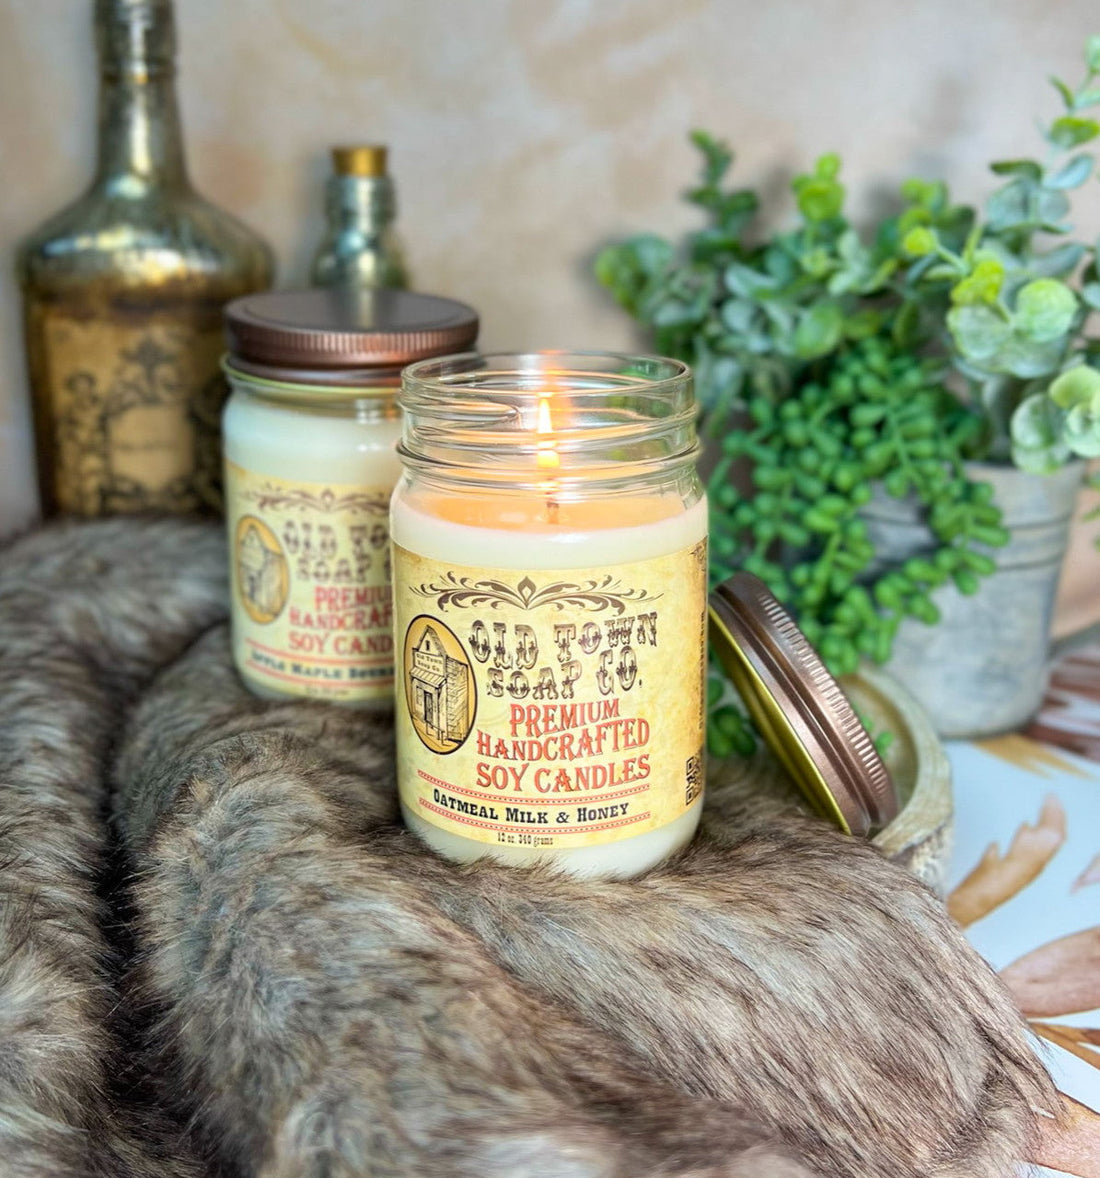 Lavender  - 12oz. Candles - Old Town Soap Co.